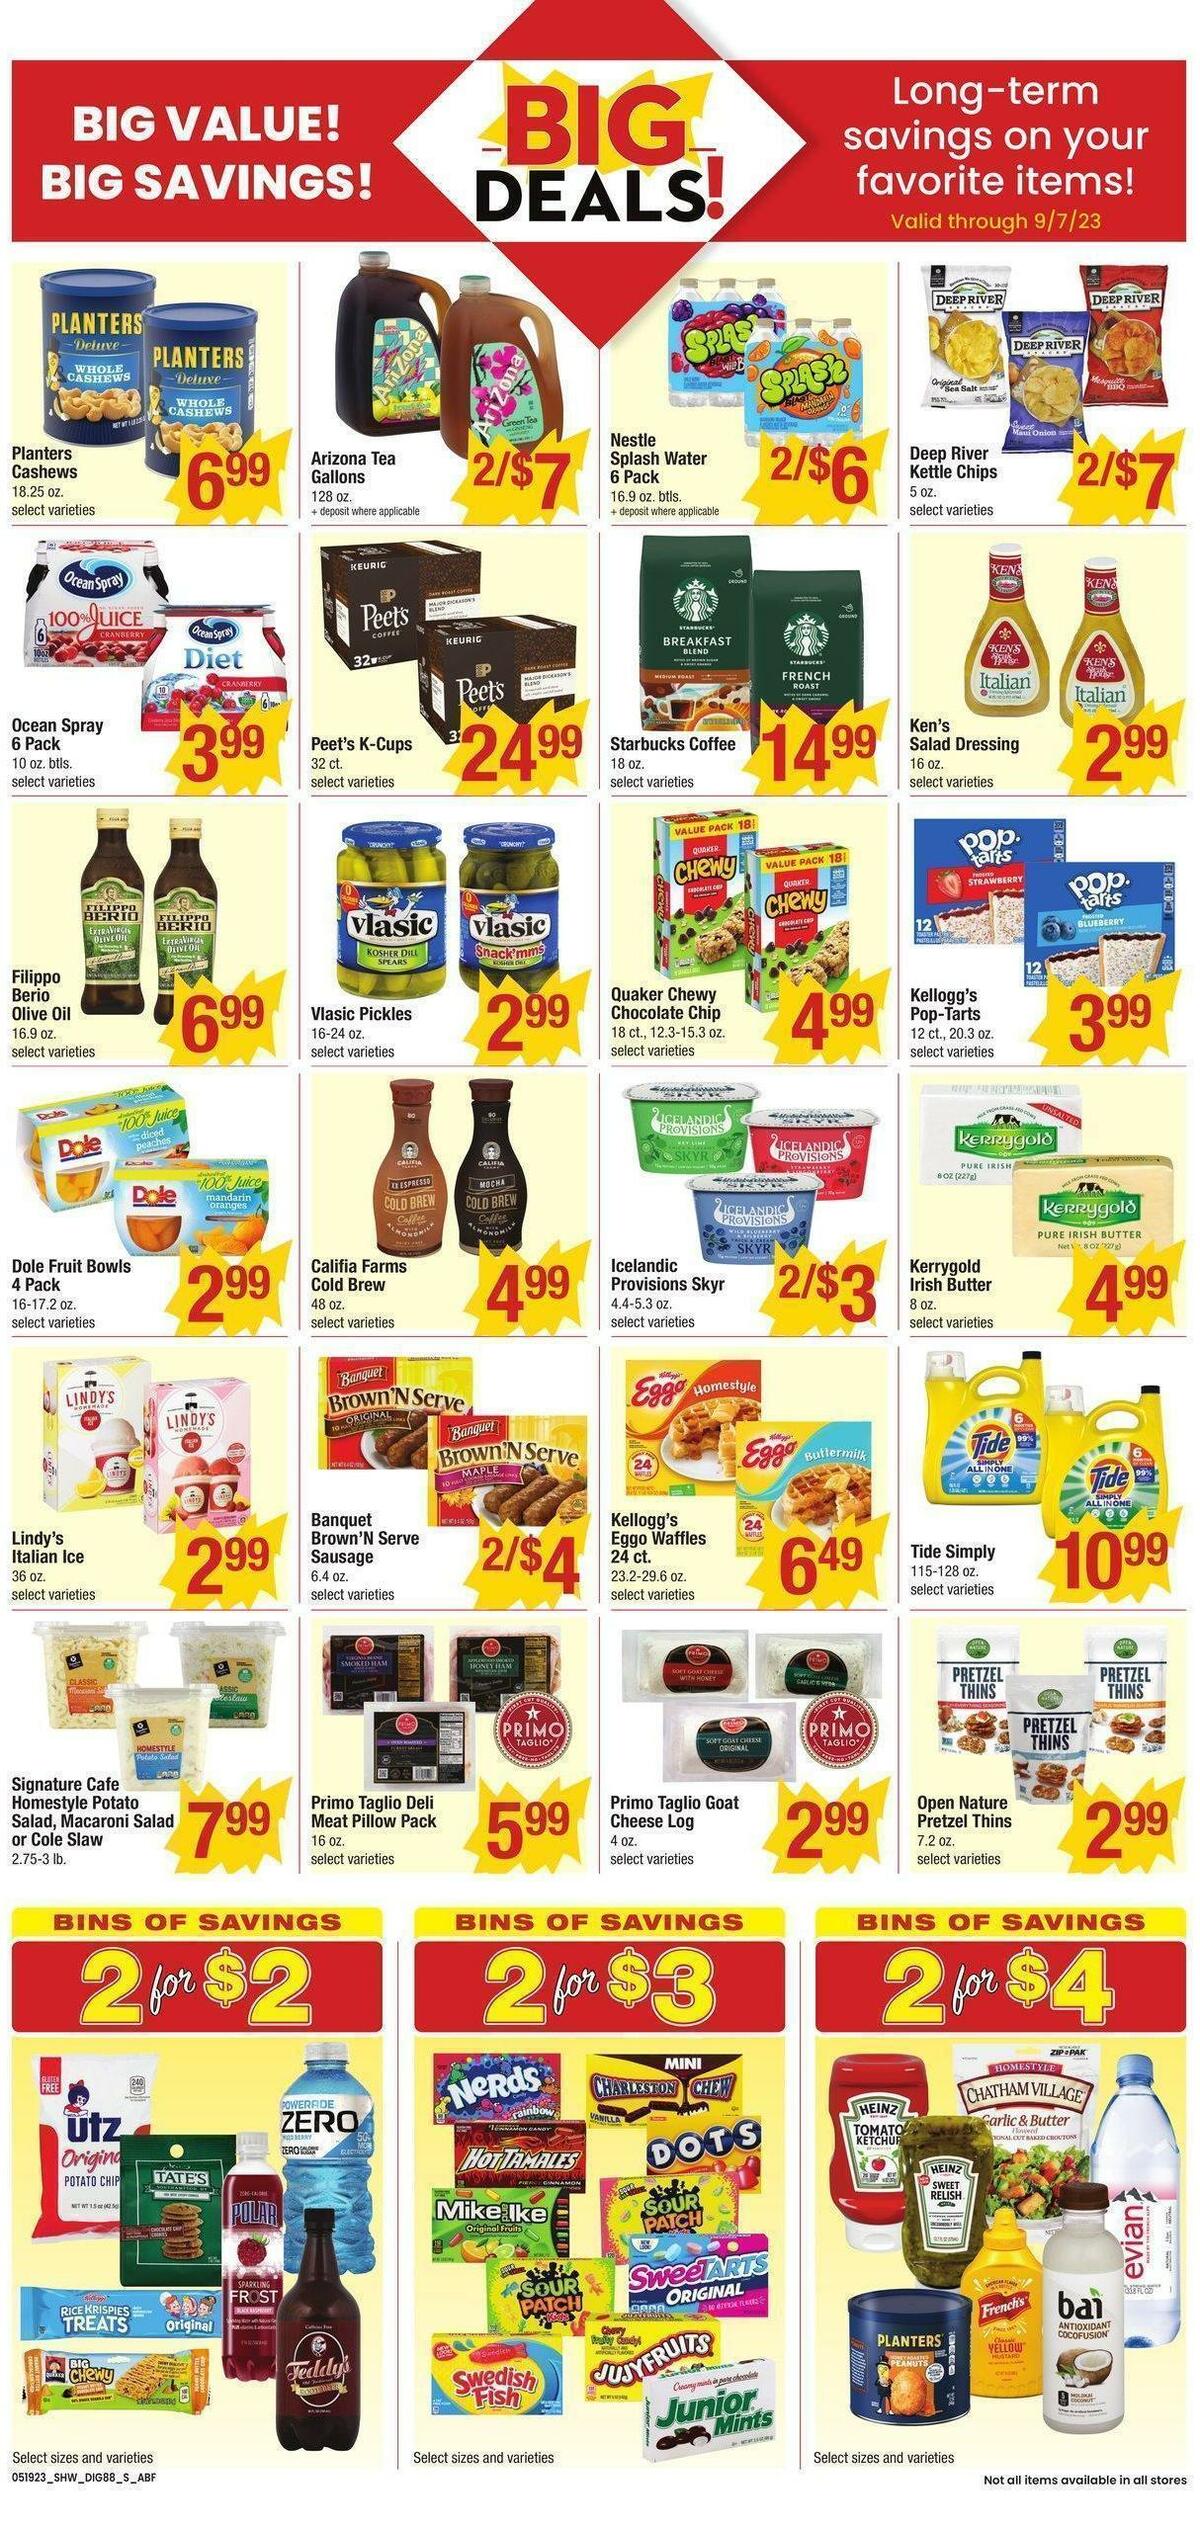 Shaw's Weekly Ad from May 19